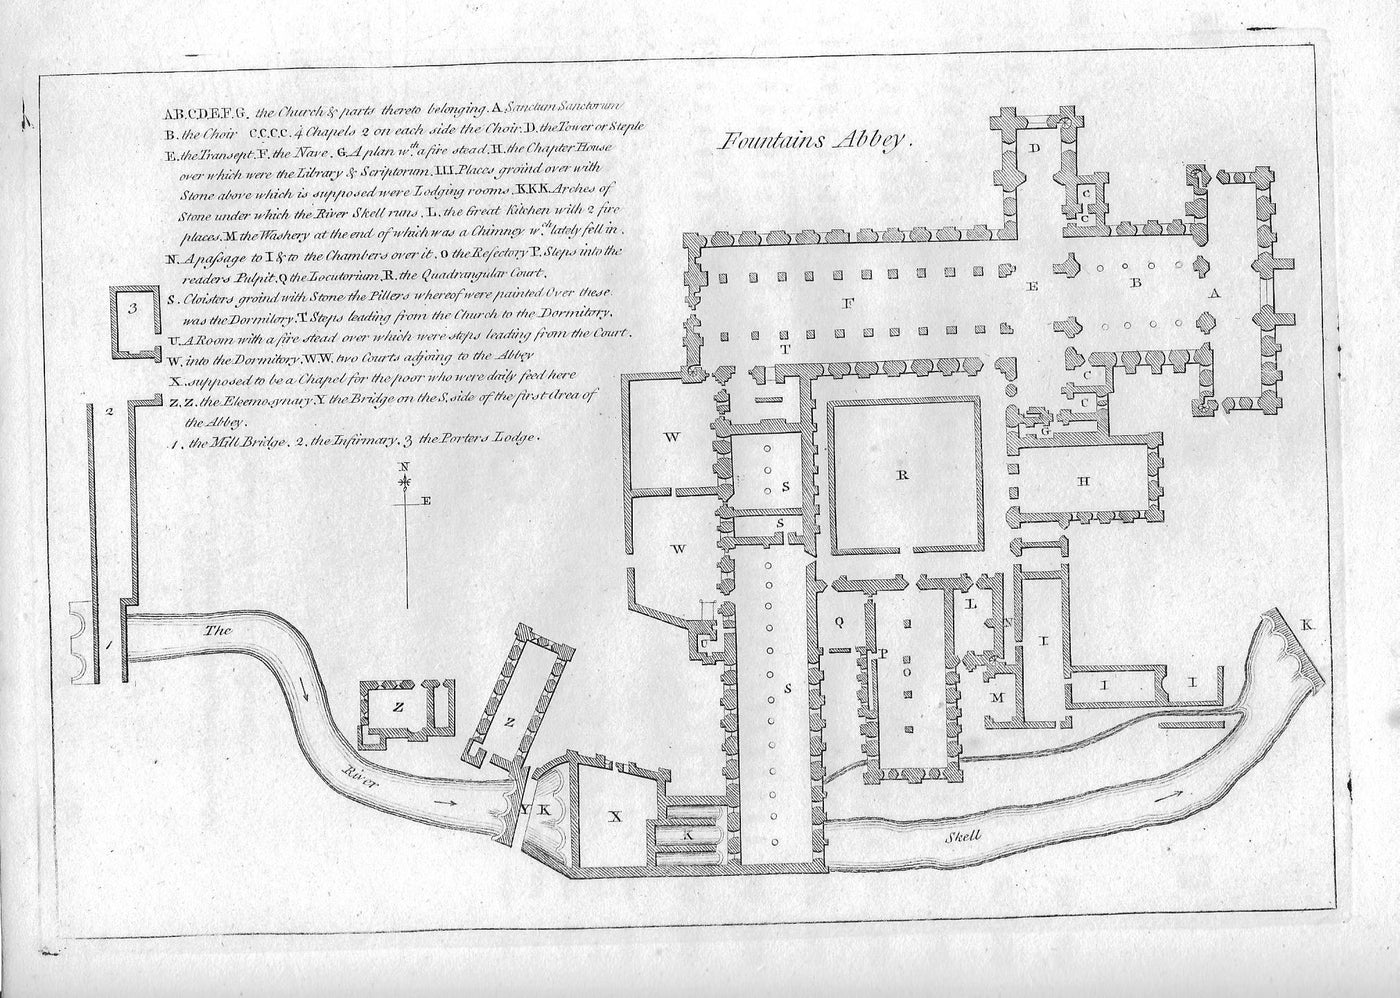 Fountains Abbey ground plan from Francis Grose's "Antiquities .." 1785